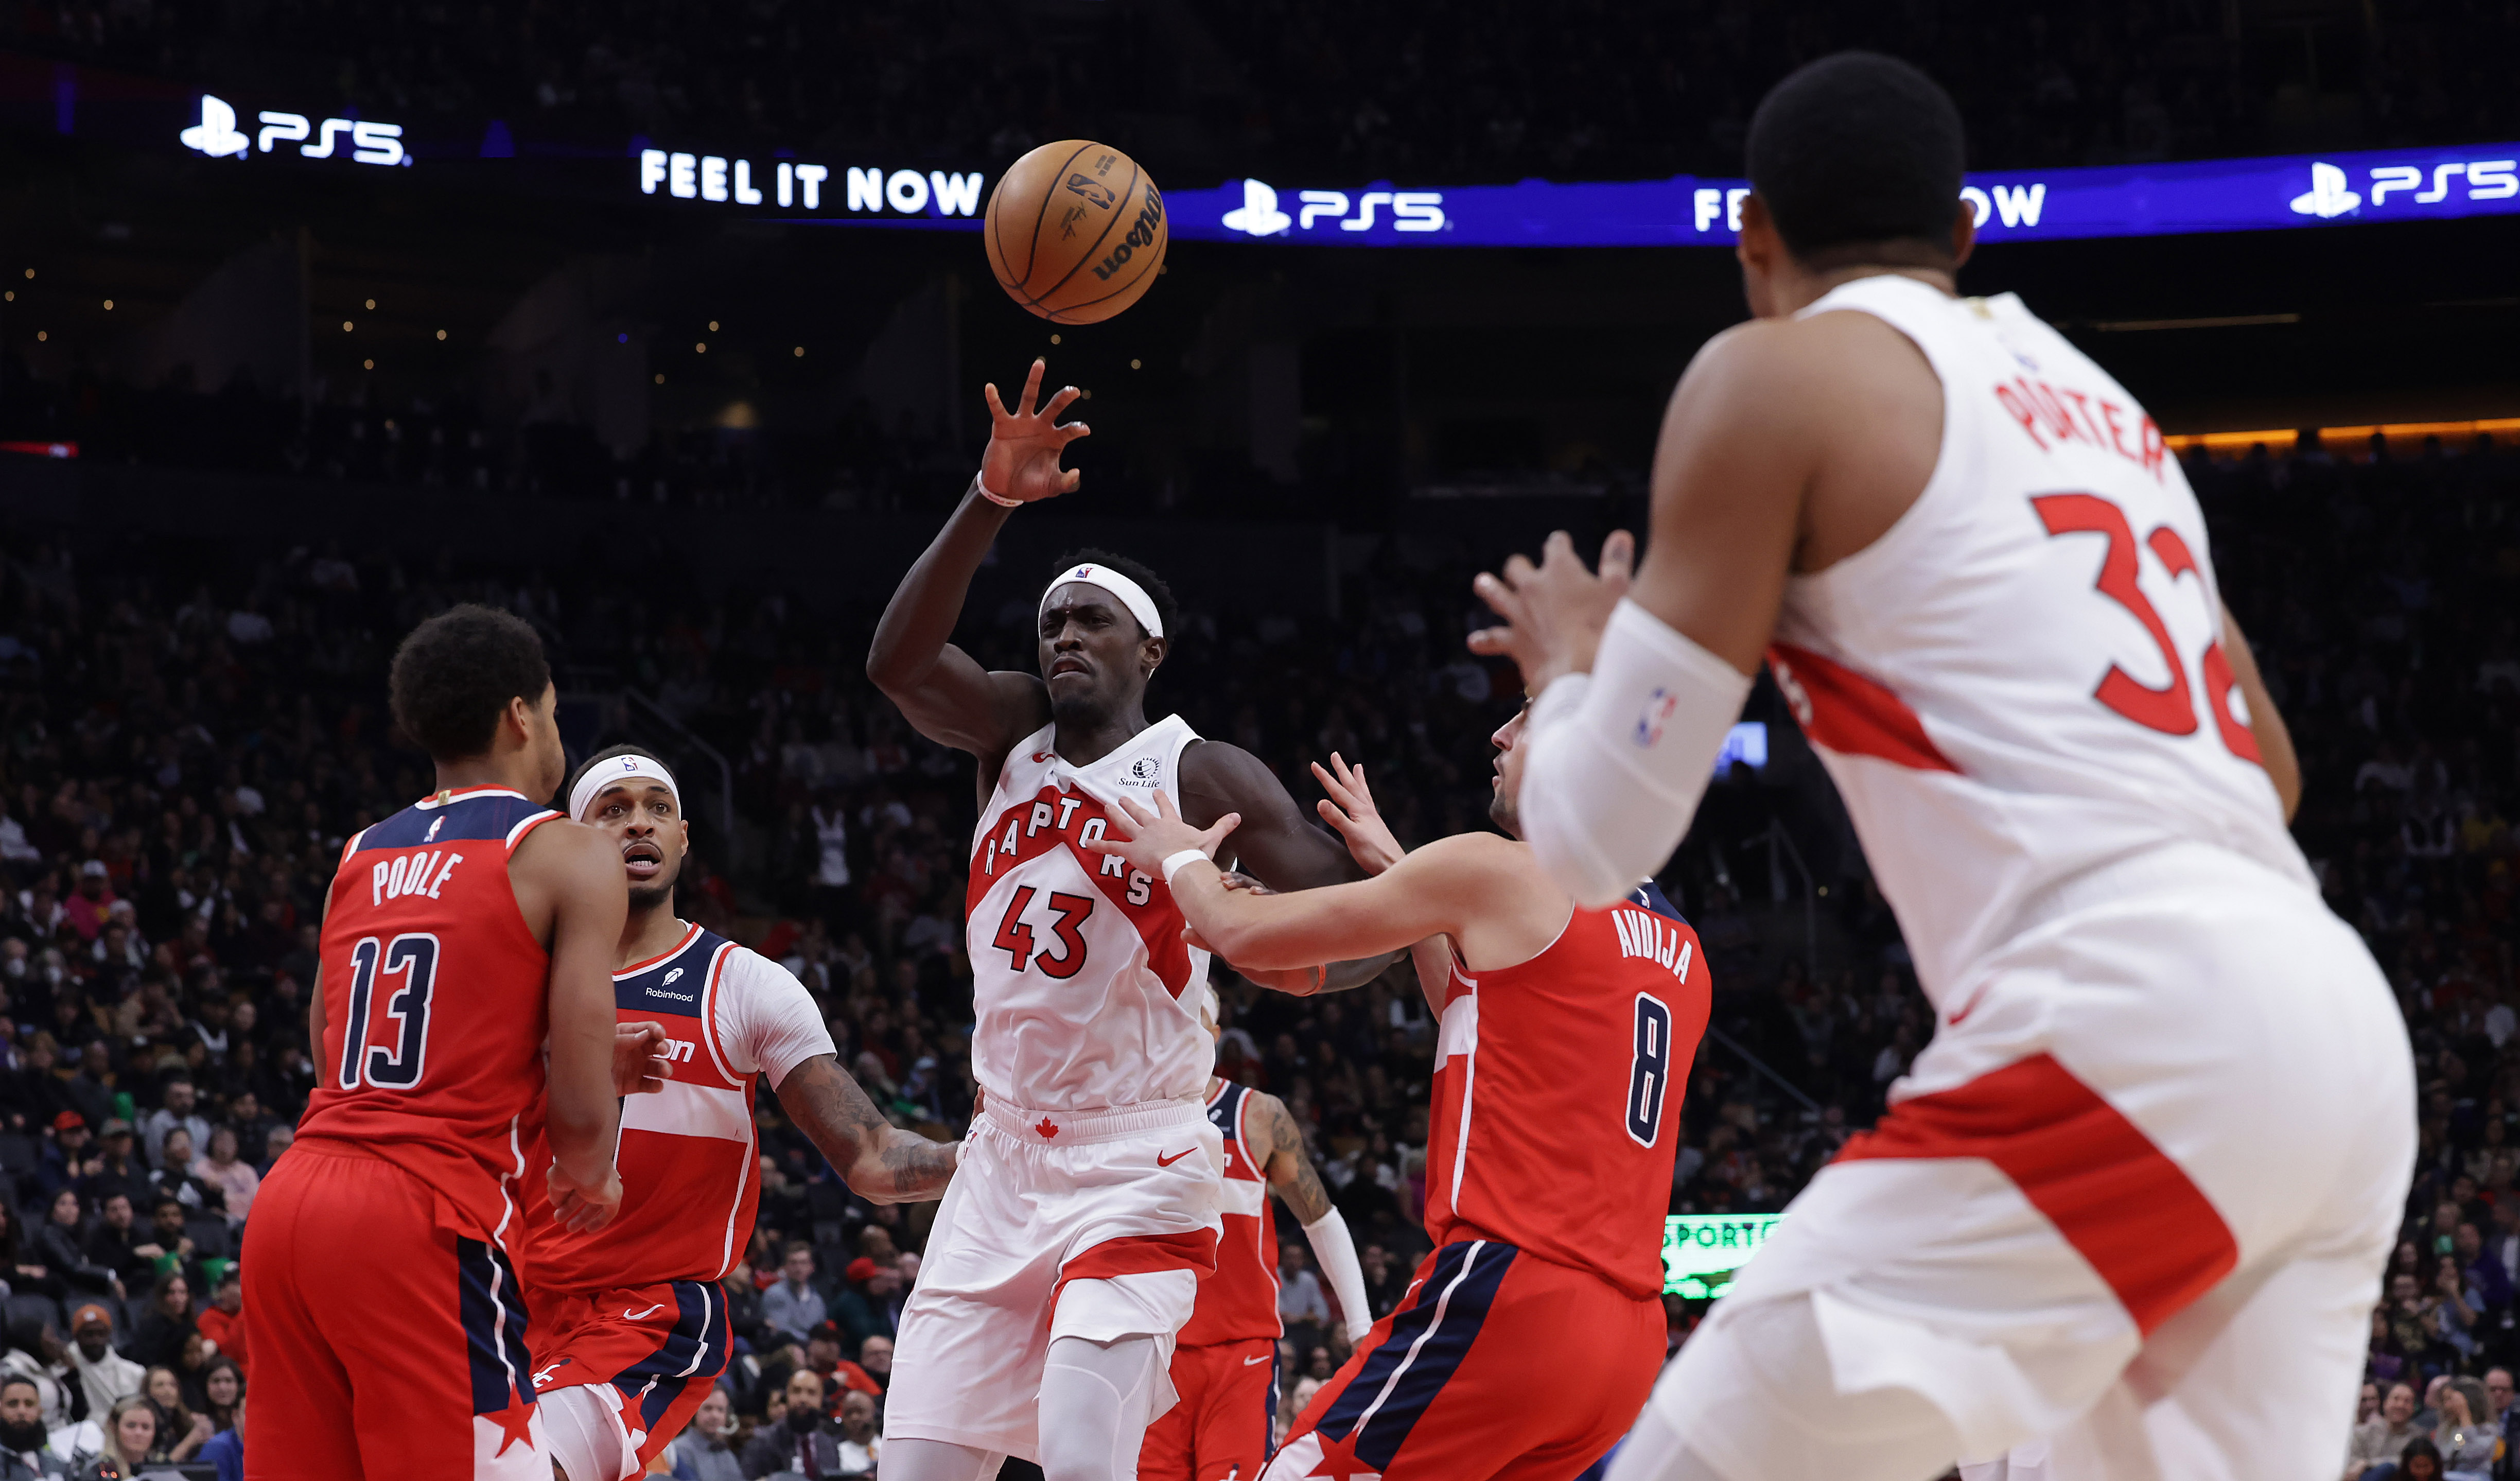 Toronto Raptors after being down more than 20 points come back to beat the Washington Wizards 111-107